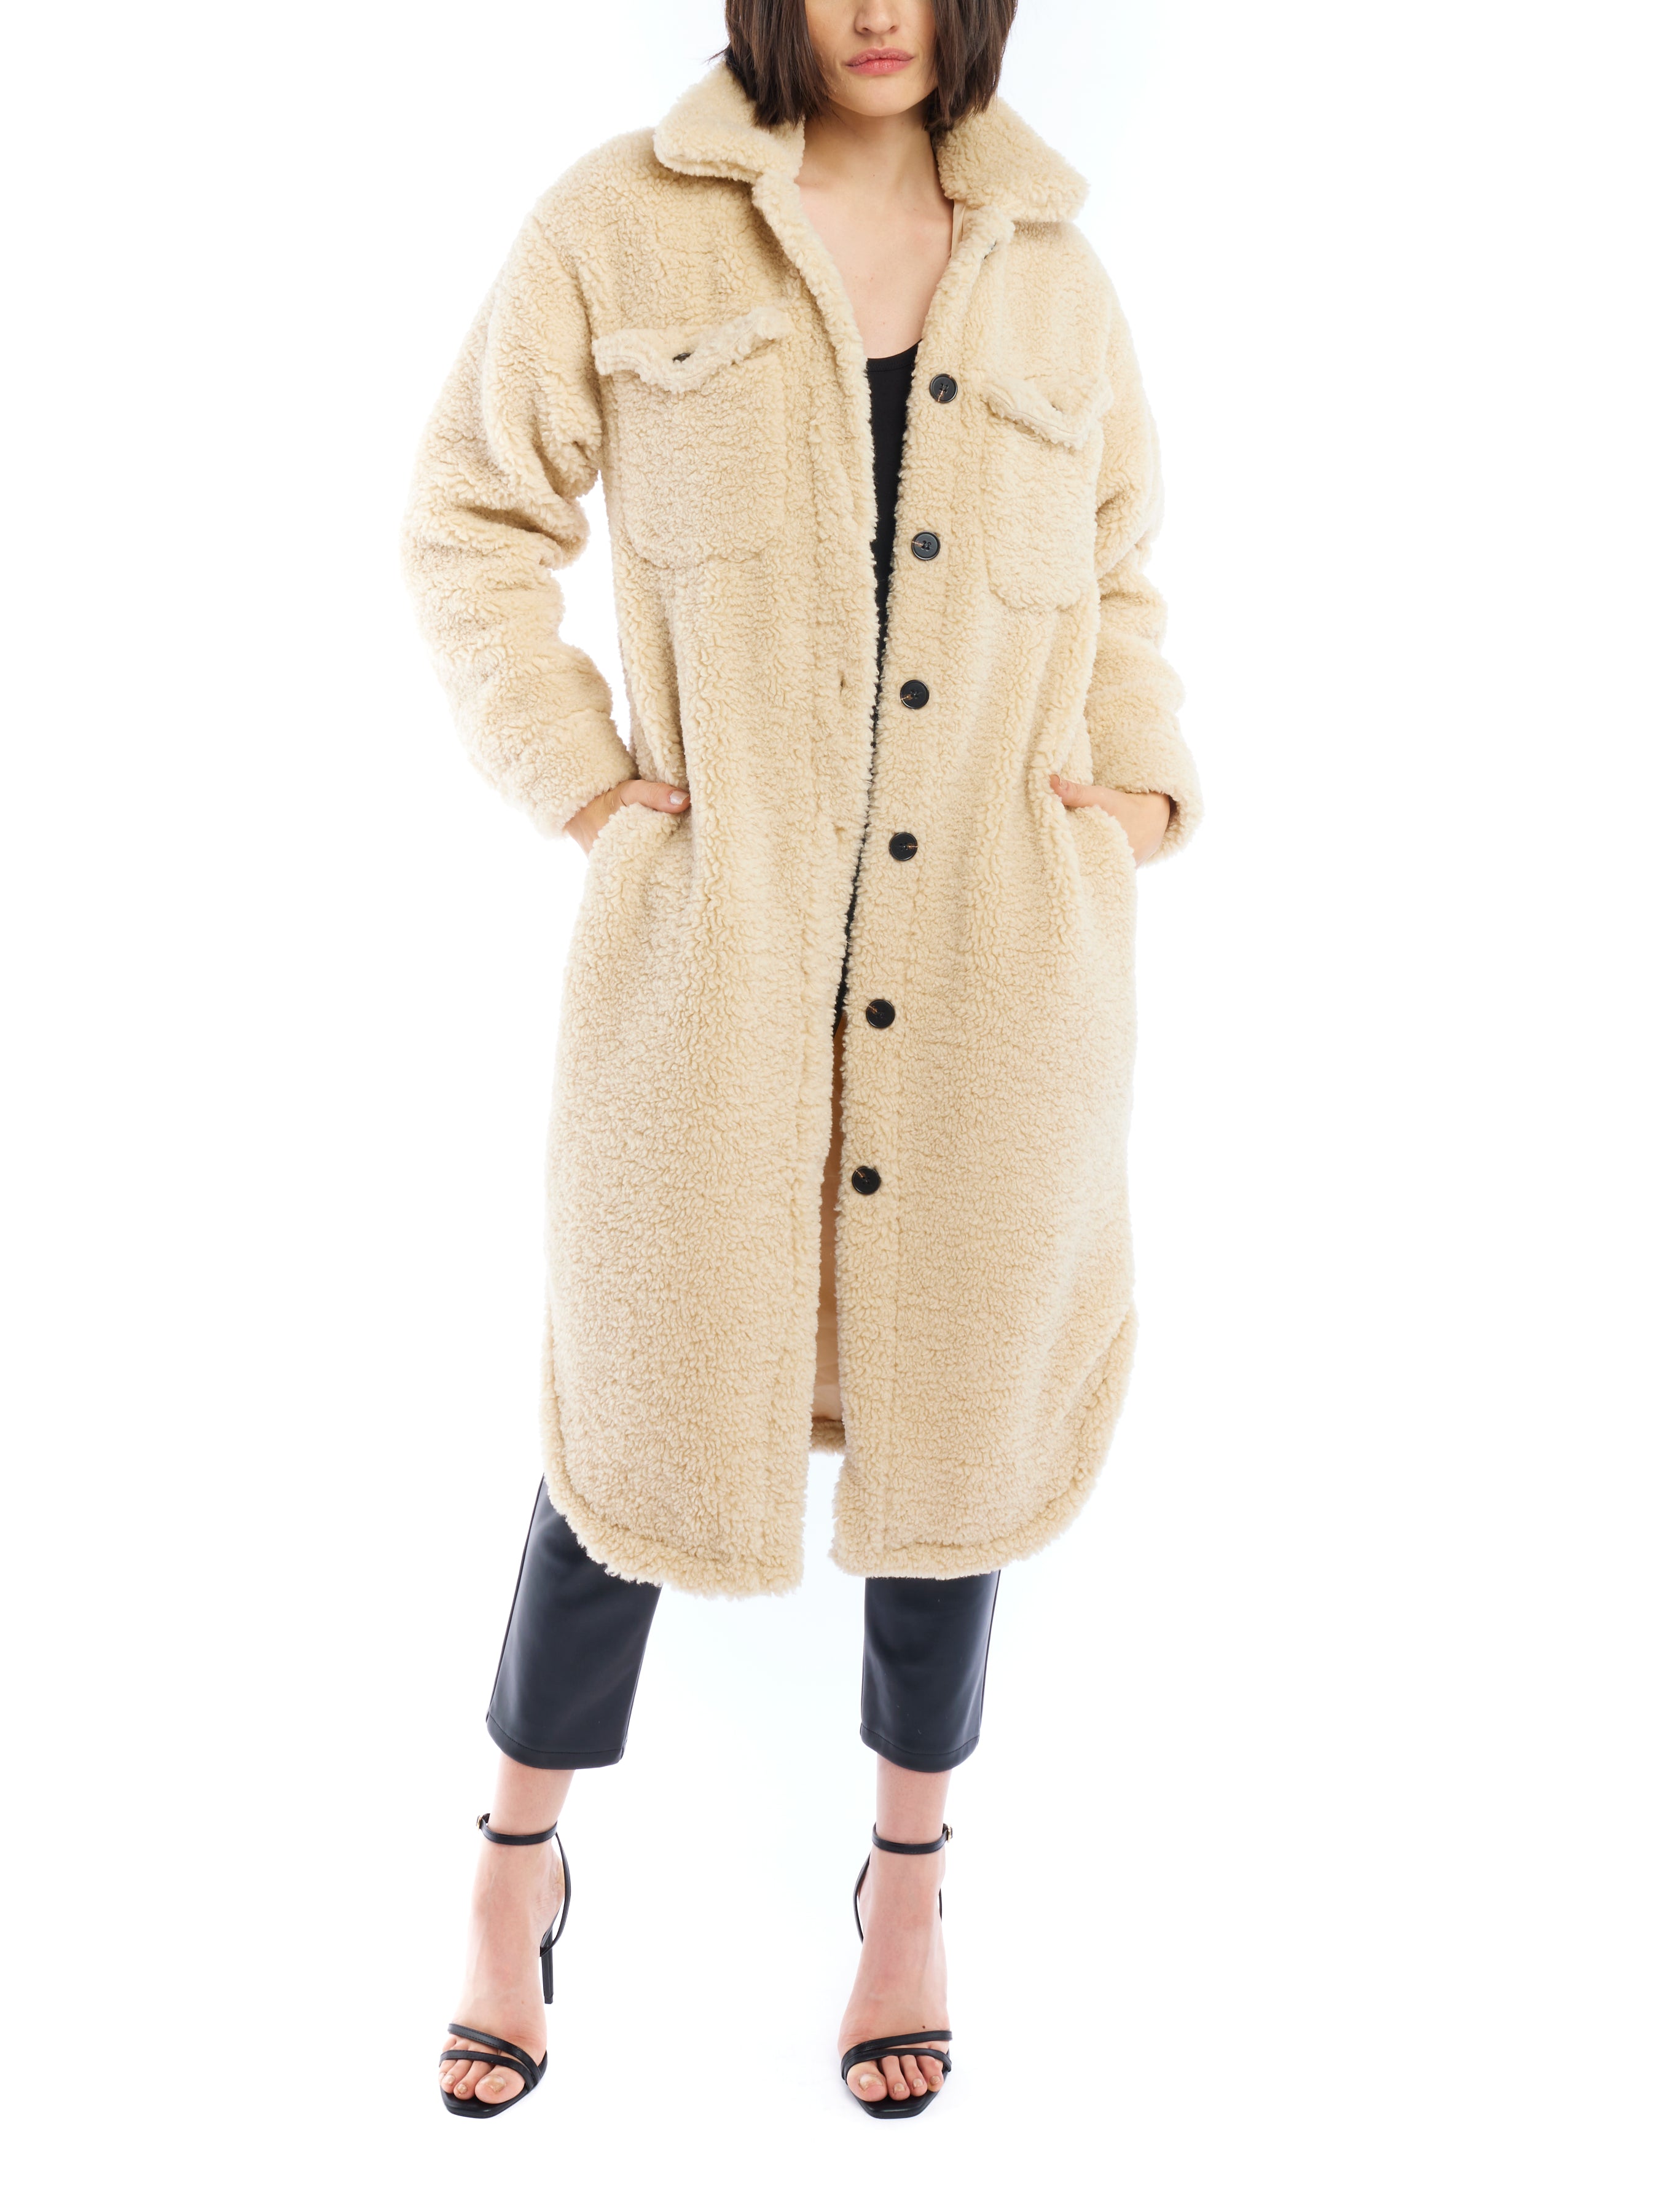 cozy jacket with shirt tail hem, midi length, two front pockets and long sleeves in cream